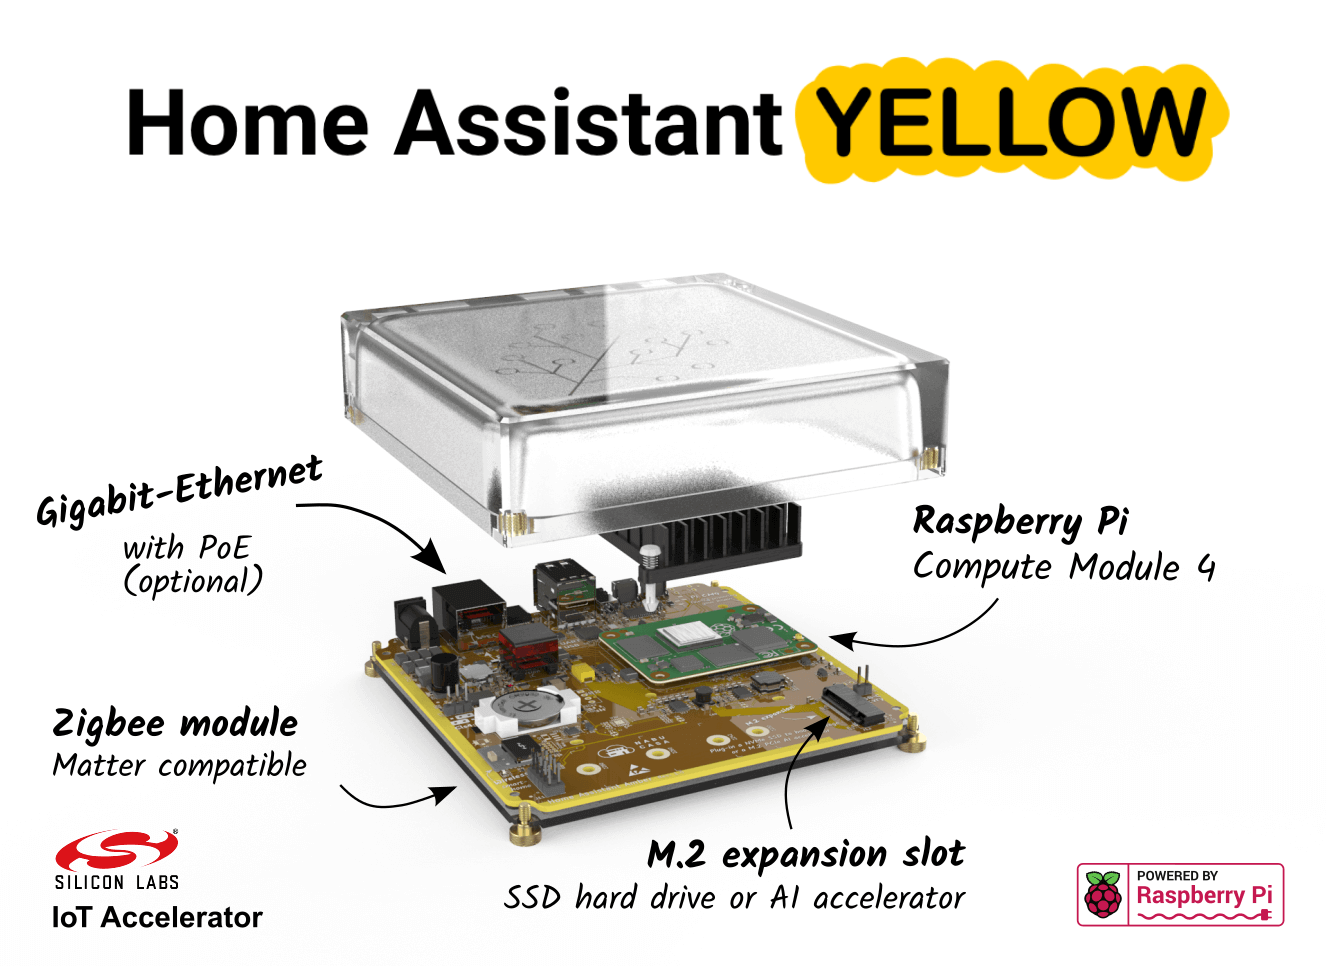 Home Assistant Yellow - Home Assistant